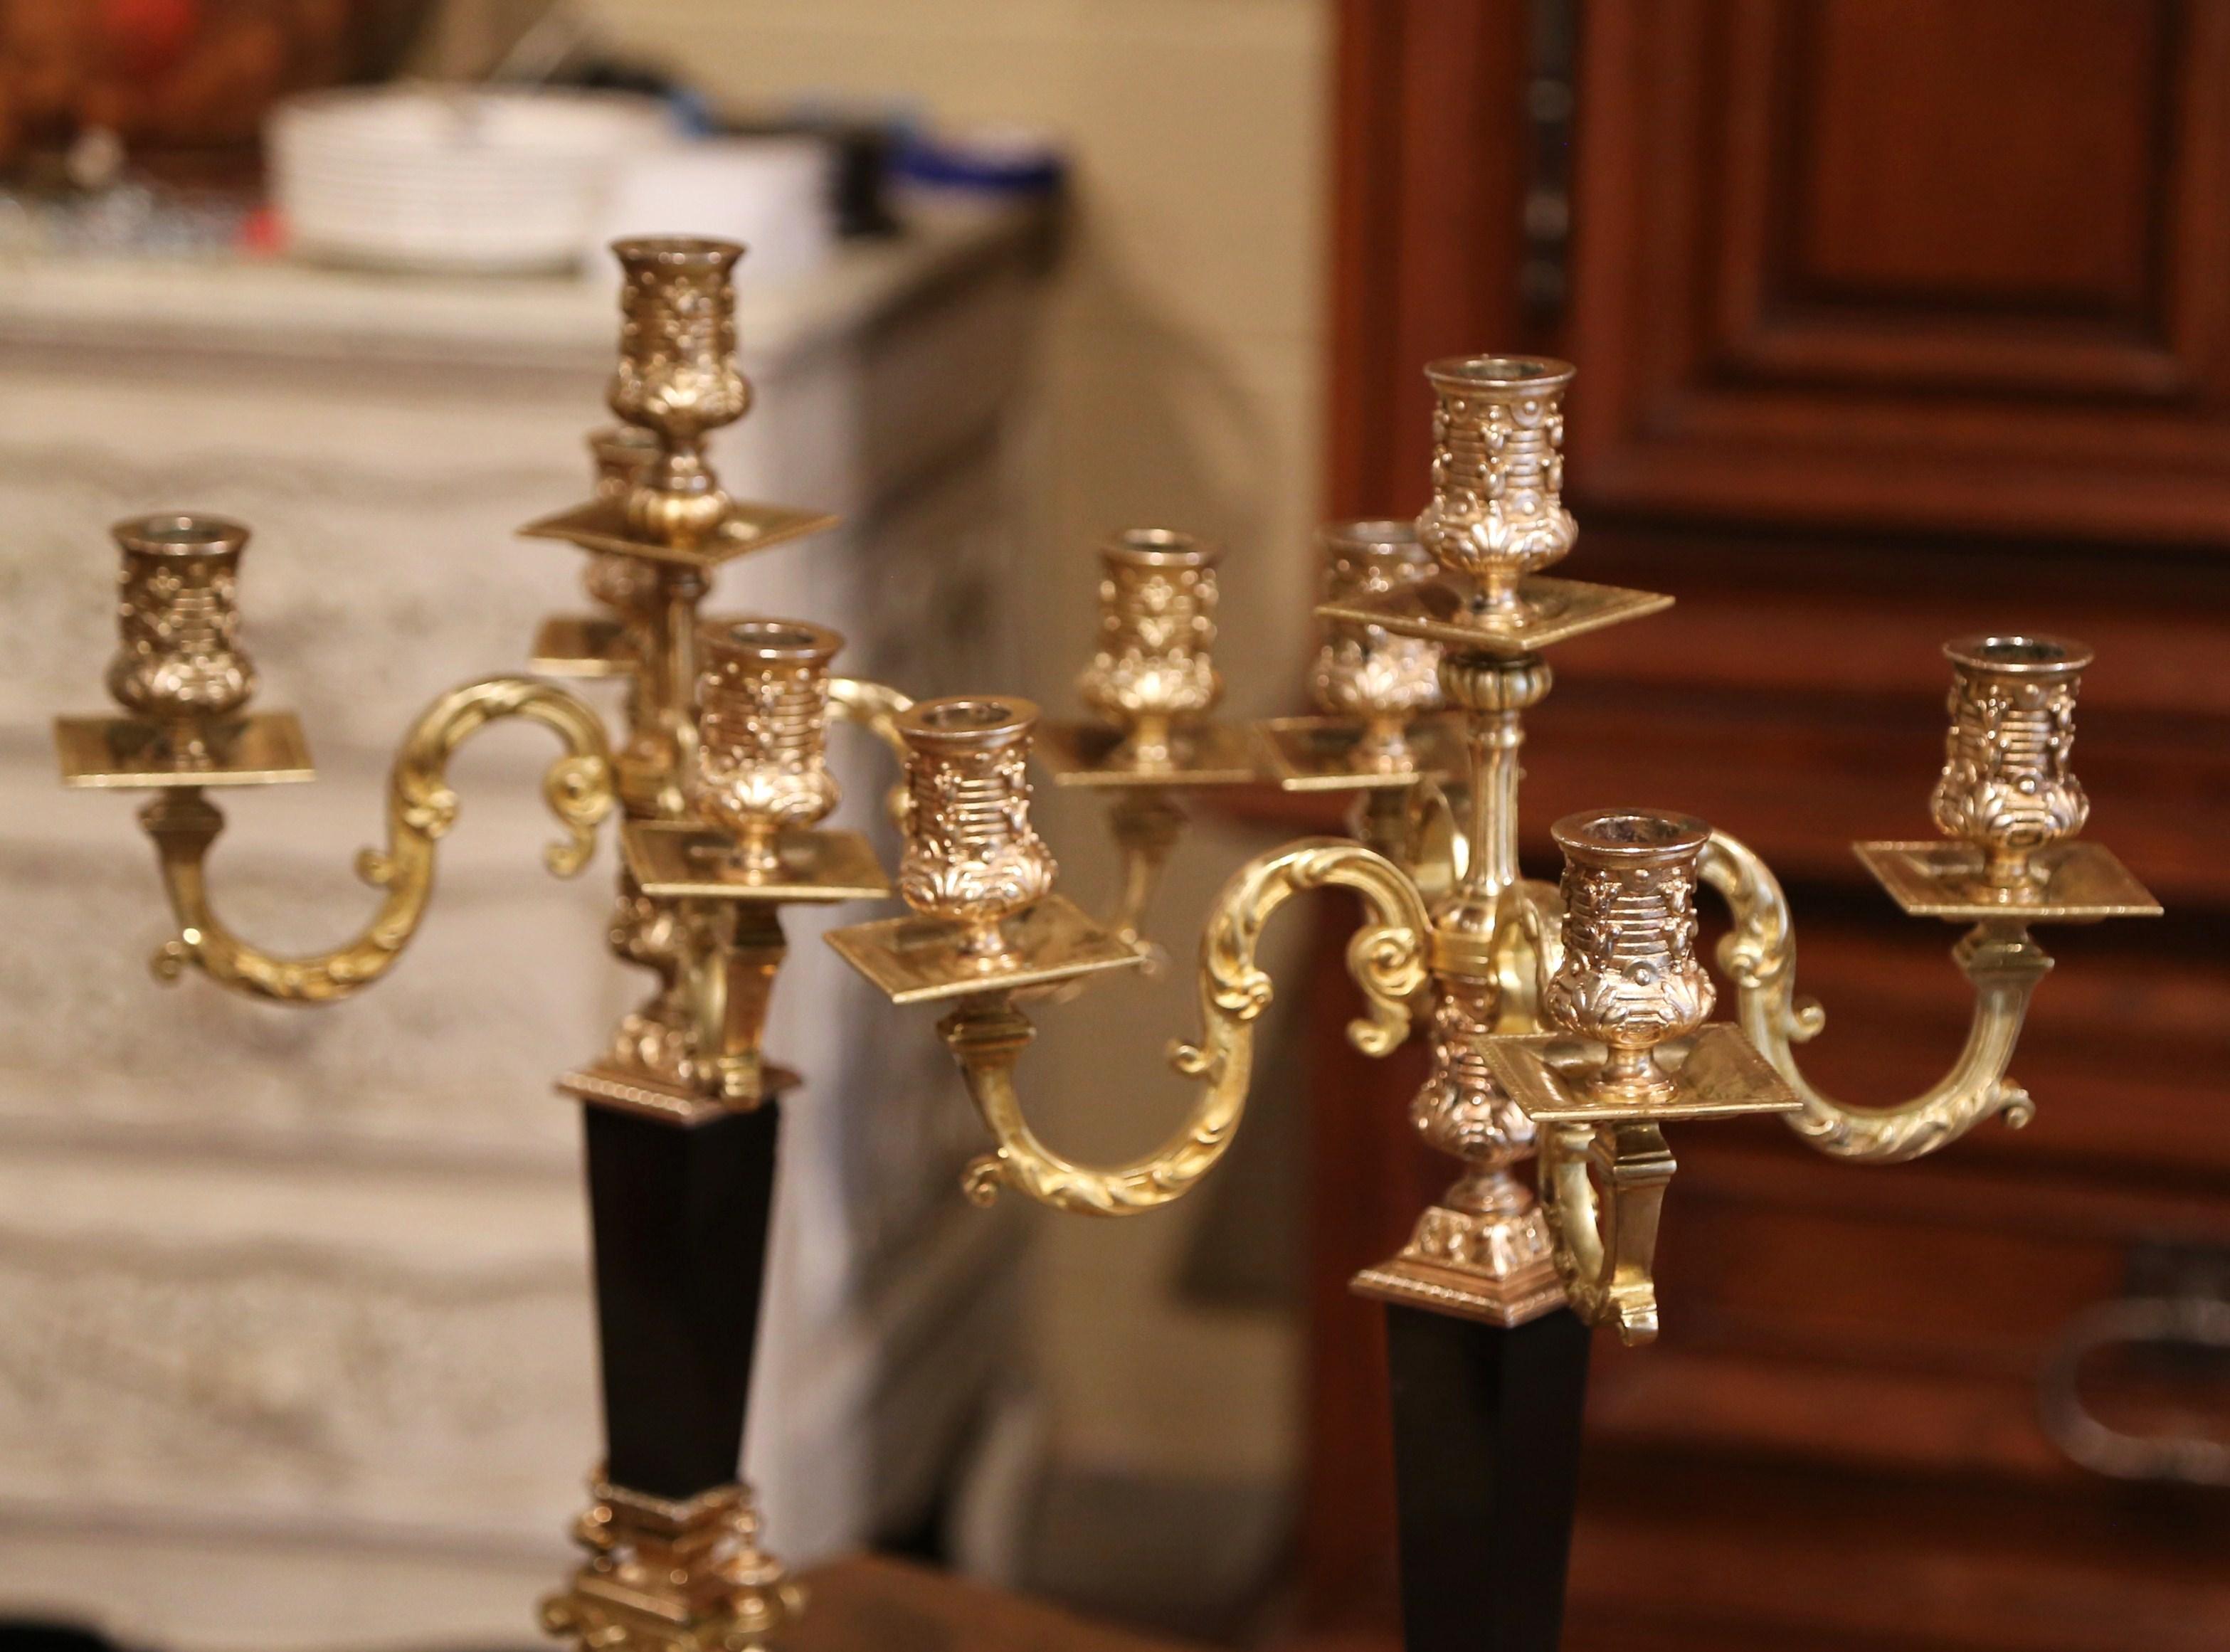 Pair of 19th Century French Bronze Dore and Black Marble Five-Arm Candelabras 1